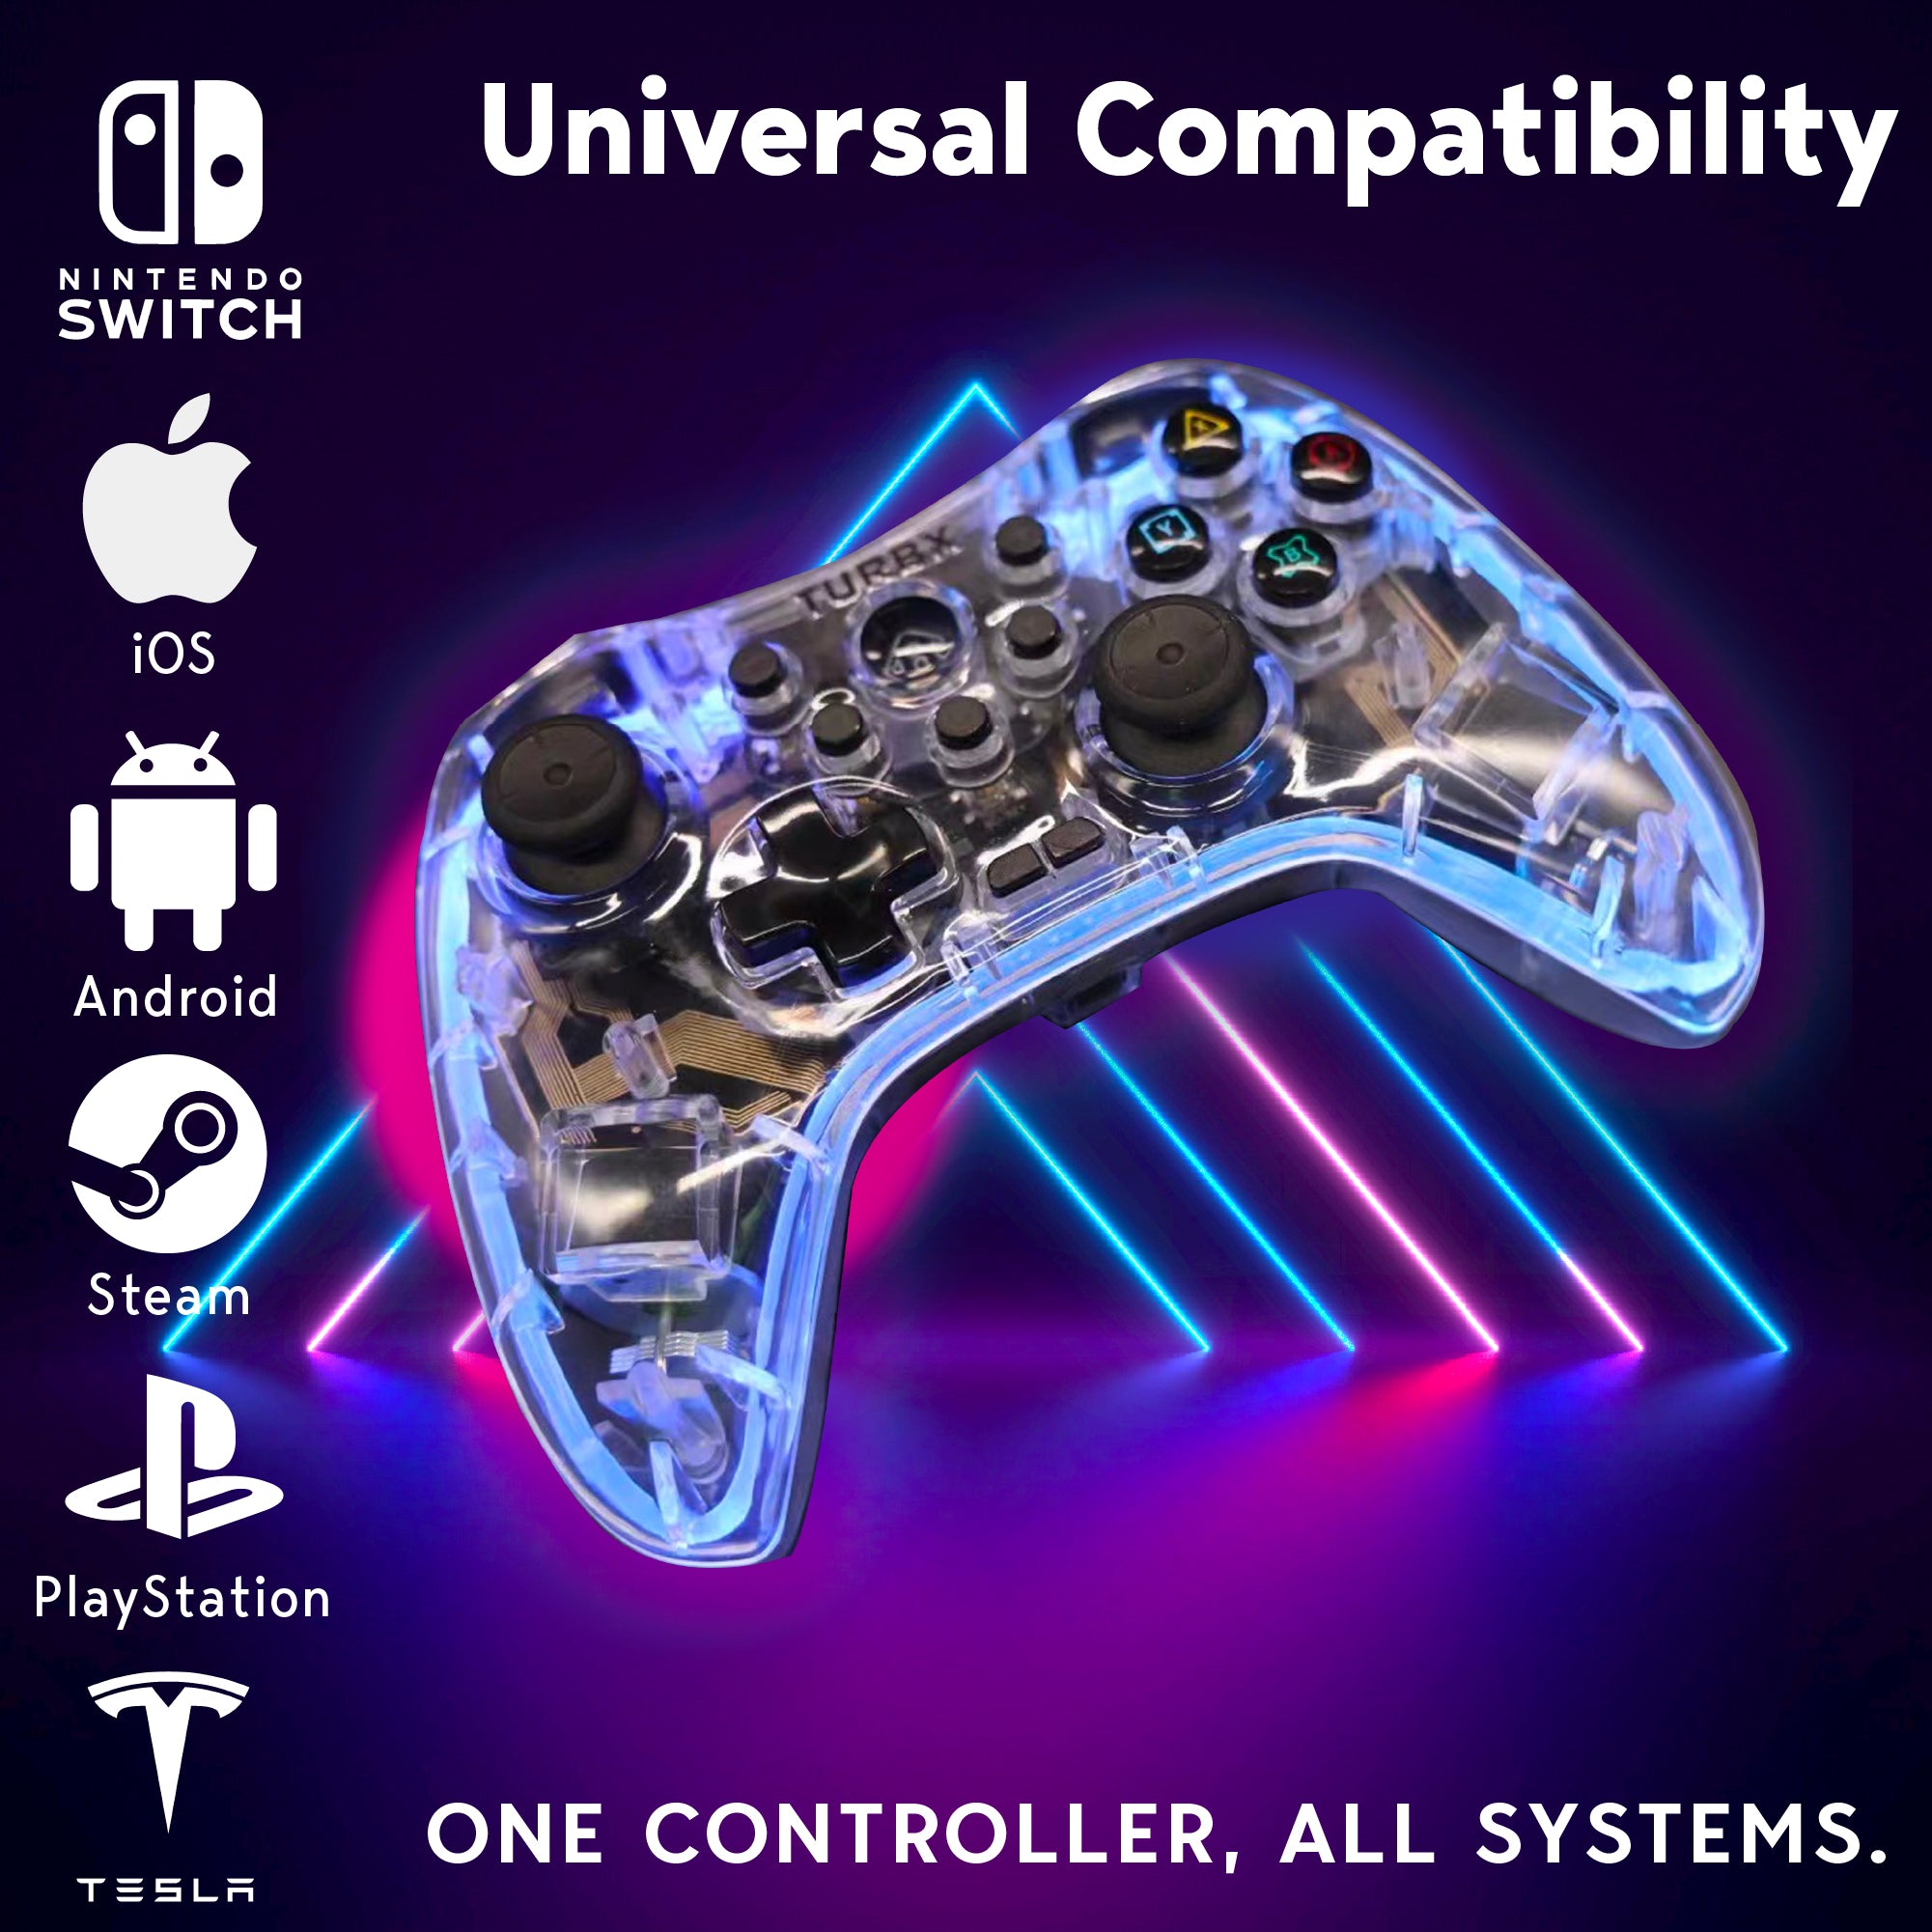 7-in-1 Wireless Game Controller Set | Switch/iPhone/Android/PC/Steam.Bluetooth Gamepad w/ non-slip phone grip for mobile gaming, finger sleeves for enhanced phone control, & Bluetooth adapter to wirelessly connect with computer. Seamless Compatible to Multi-Platforms video game consoles & mobile platforms: Nintendo Switch, PS4/PS3, iPhone/Android, iOS MFi/Apple Arcade, PC/Mac OS & Steam/Epic